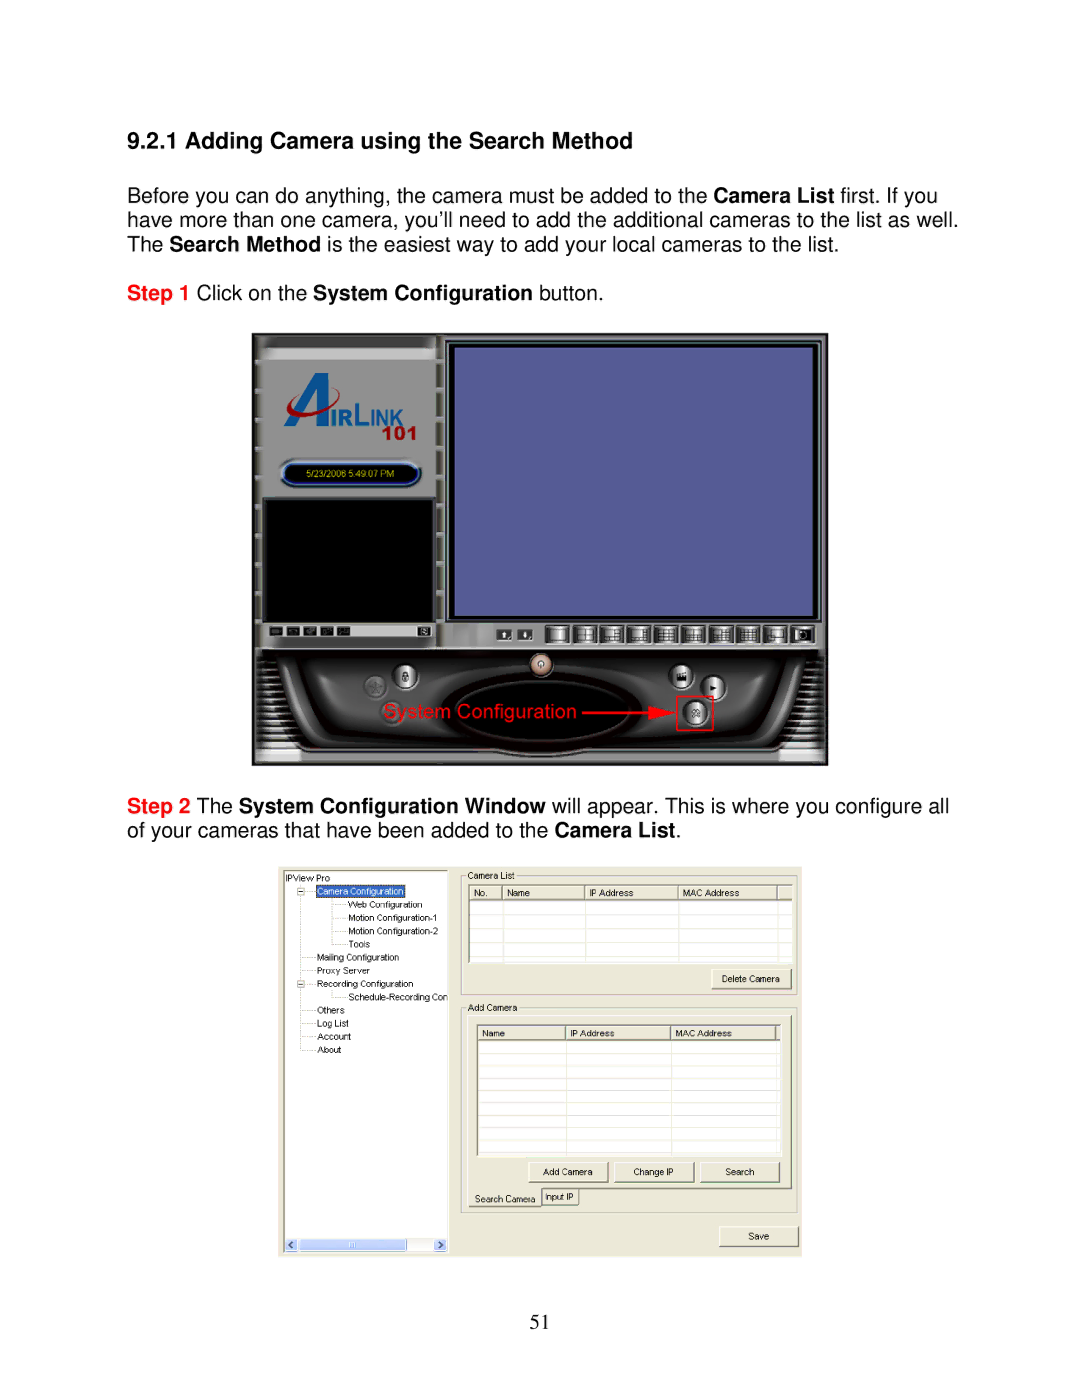 Airlink101 AICAP650 user manual Adding Camera using the Search Method, Click on the System Configuration button 